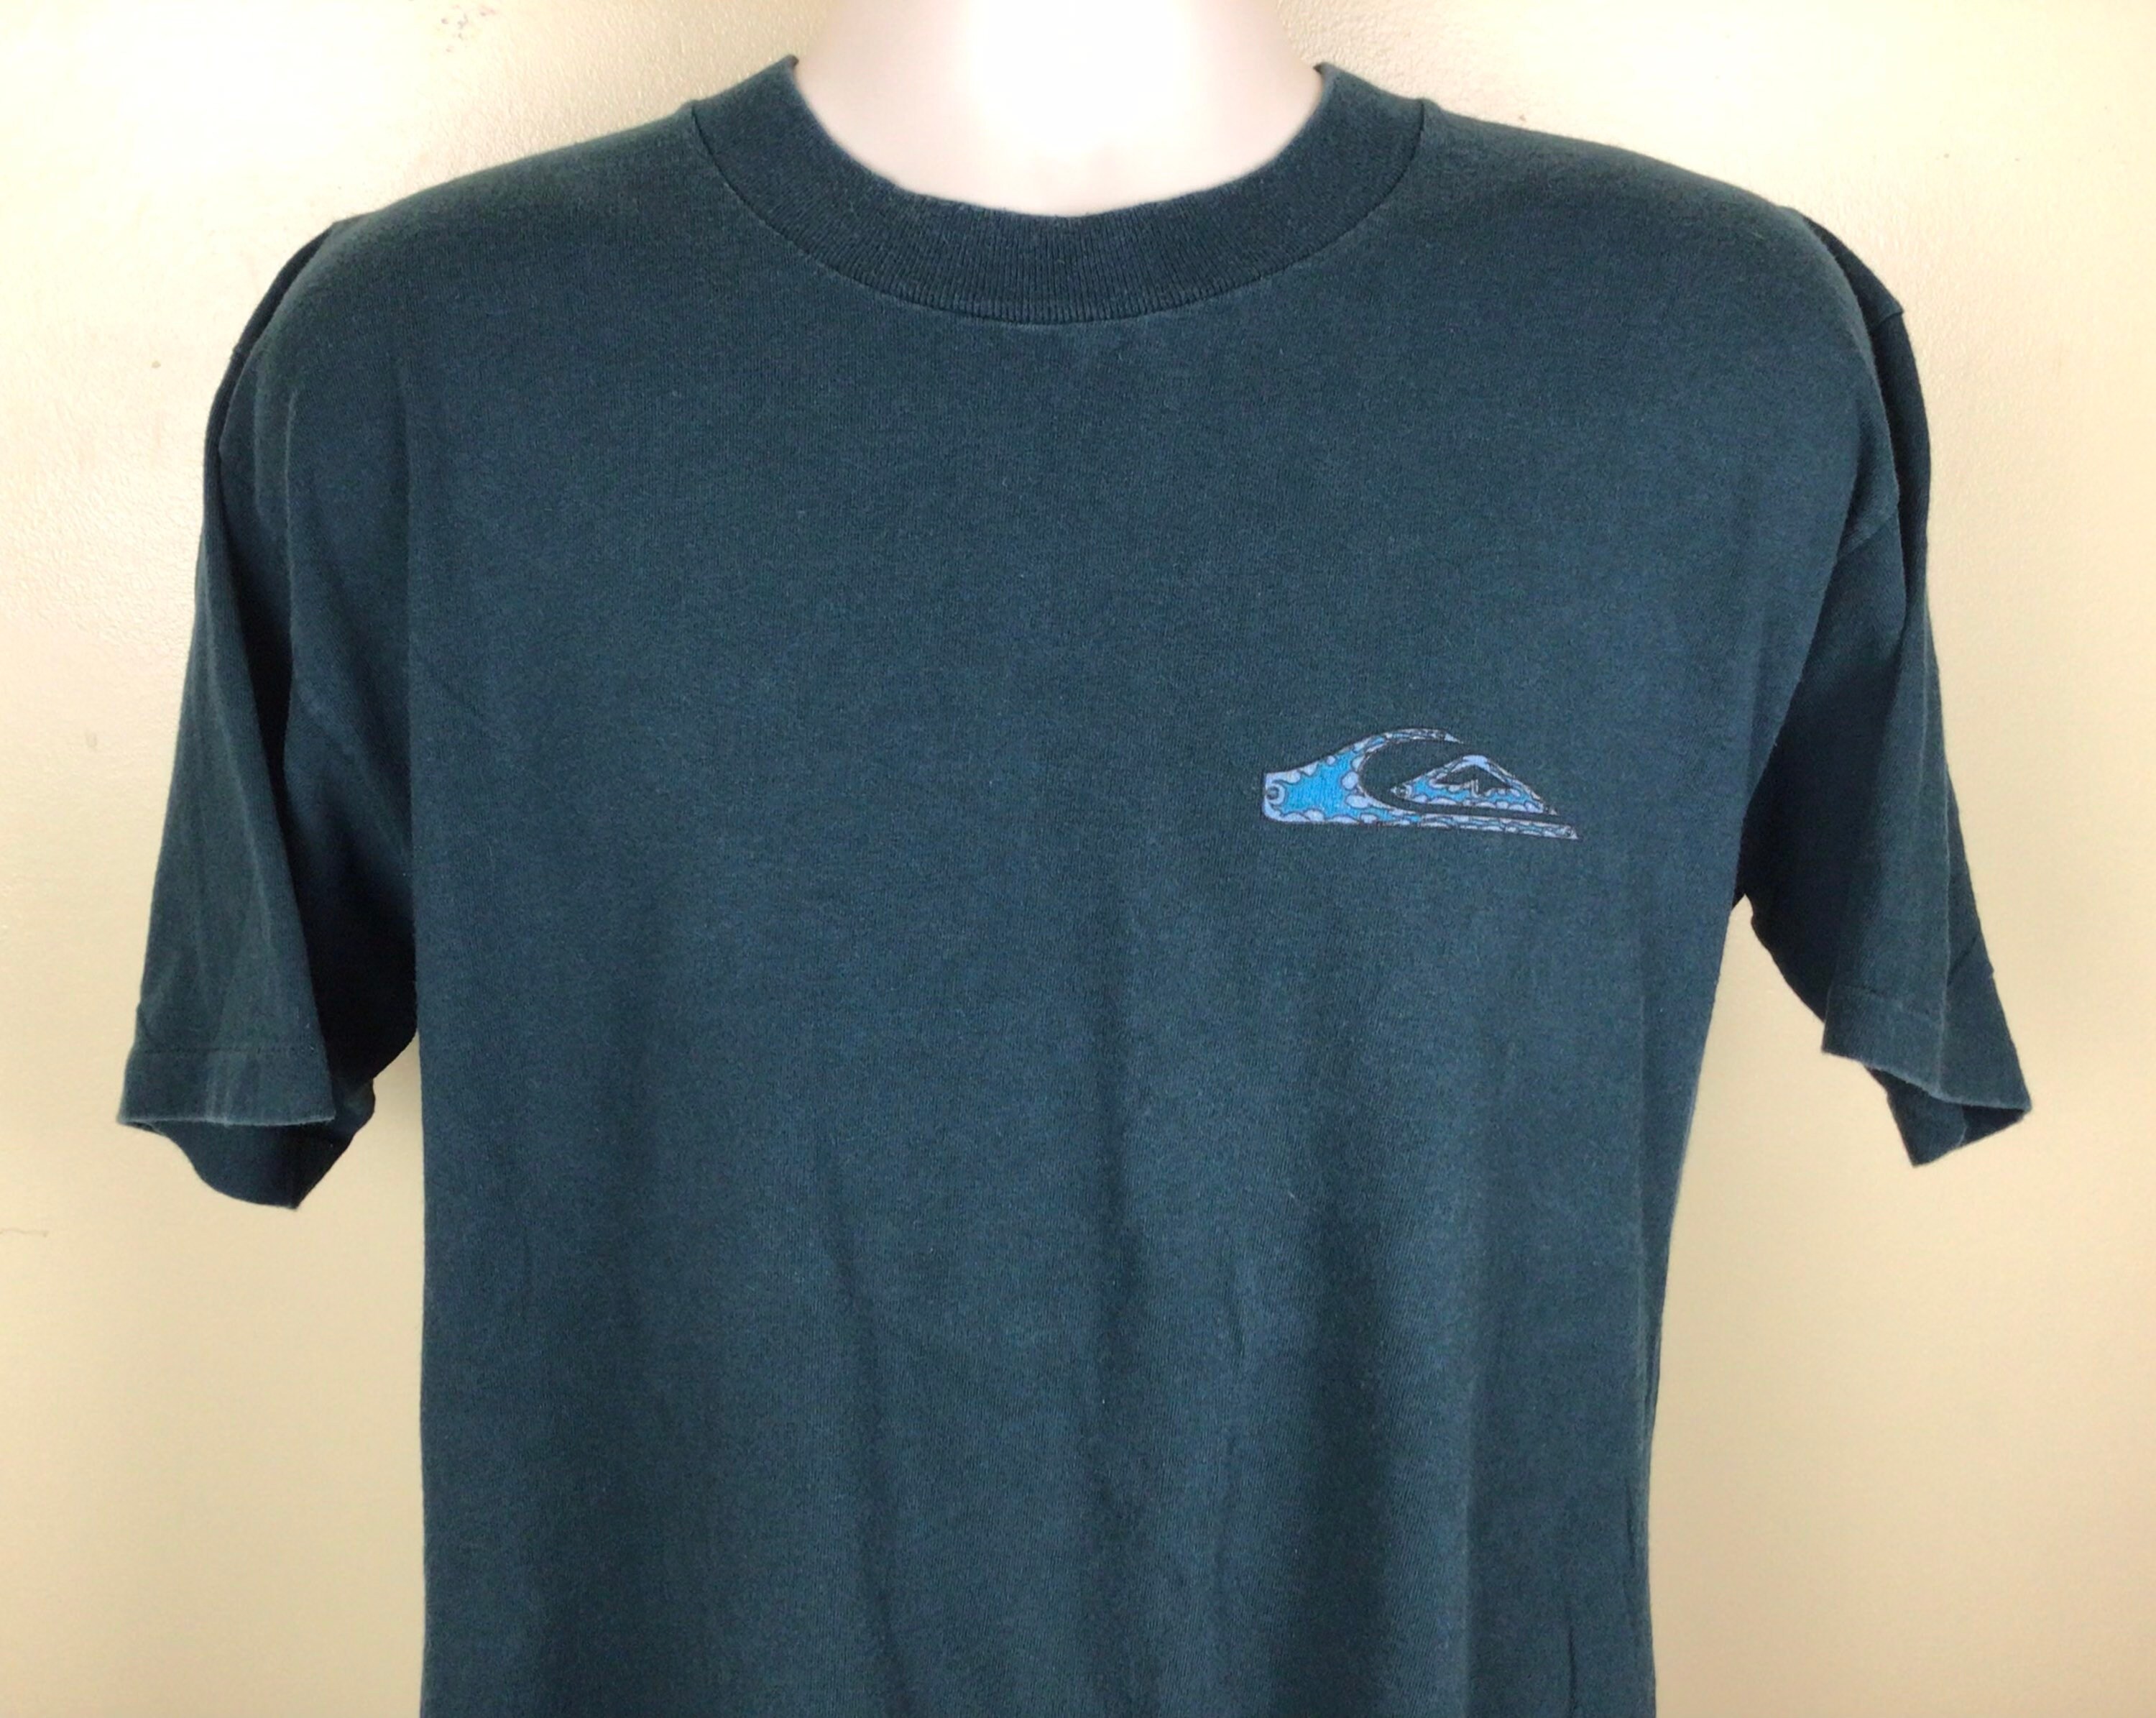 Green in Surf Single T-shirt Vtg Brand USA Made Stitch Skate Quiksilver Teal Finland 90s - L Etsy